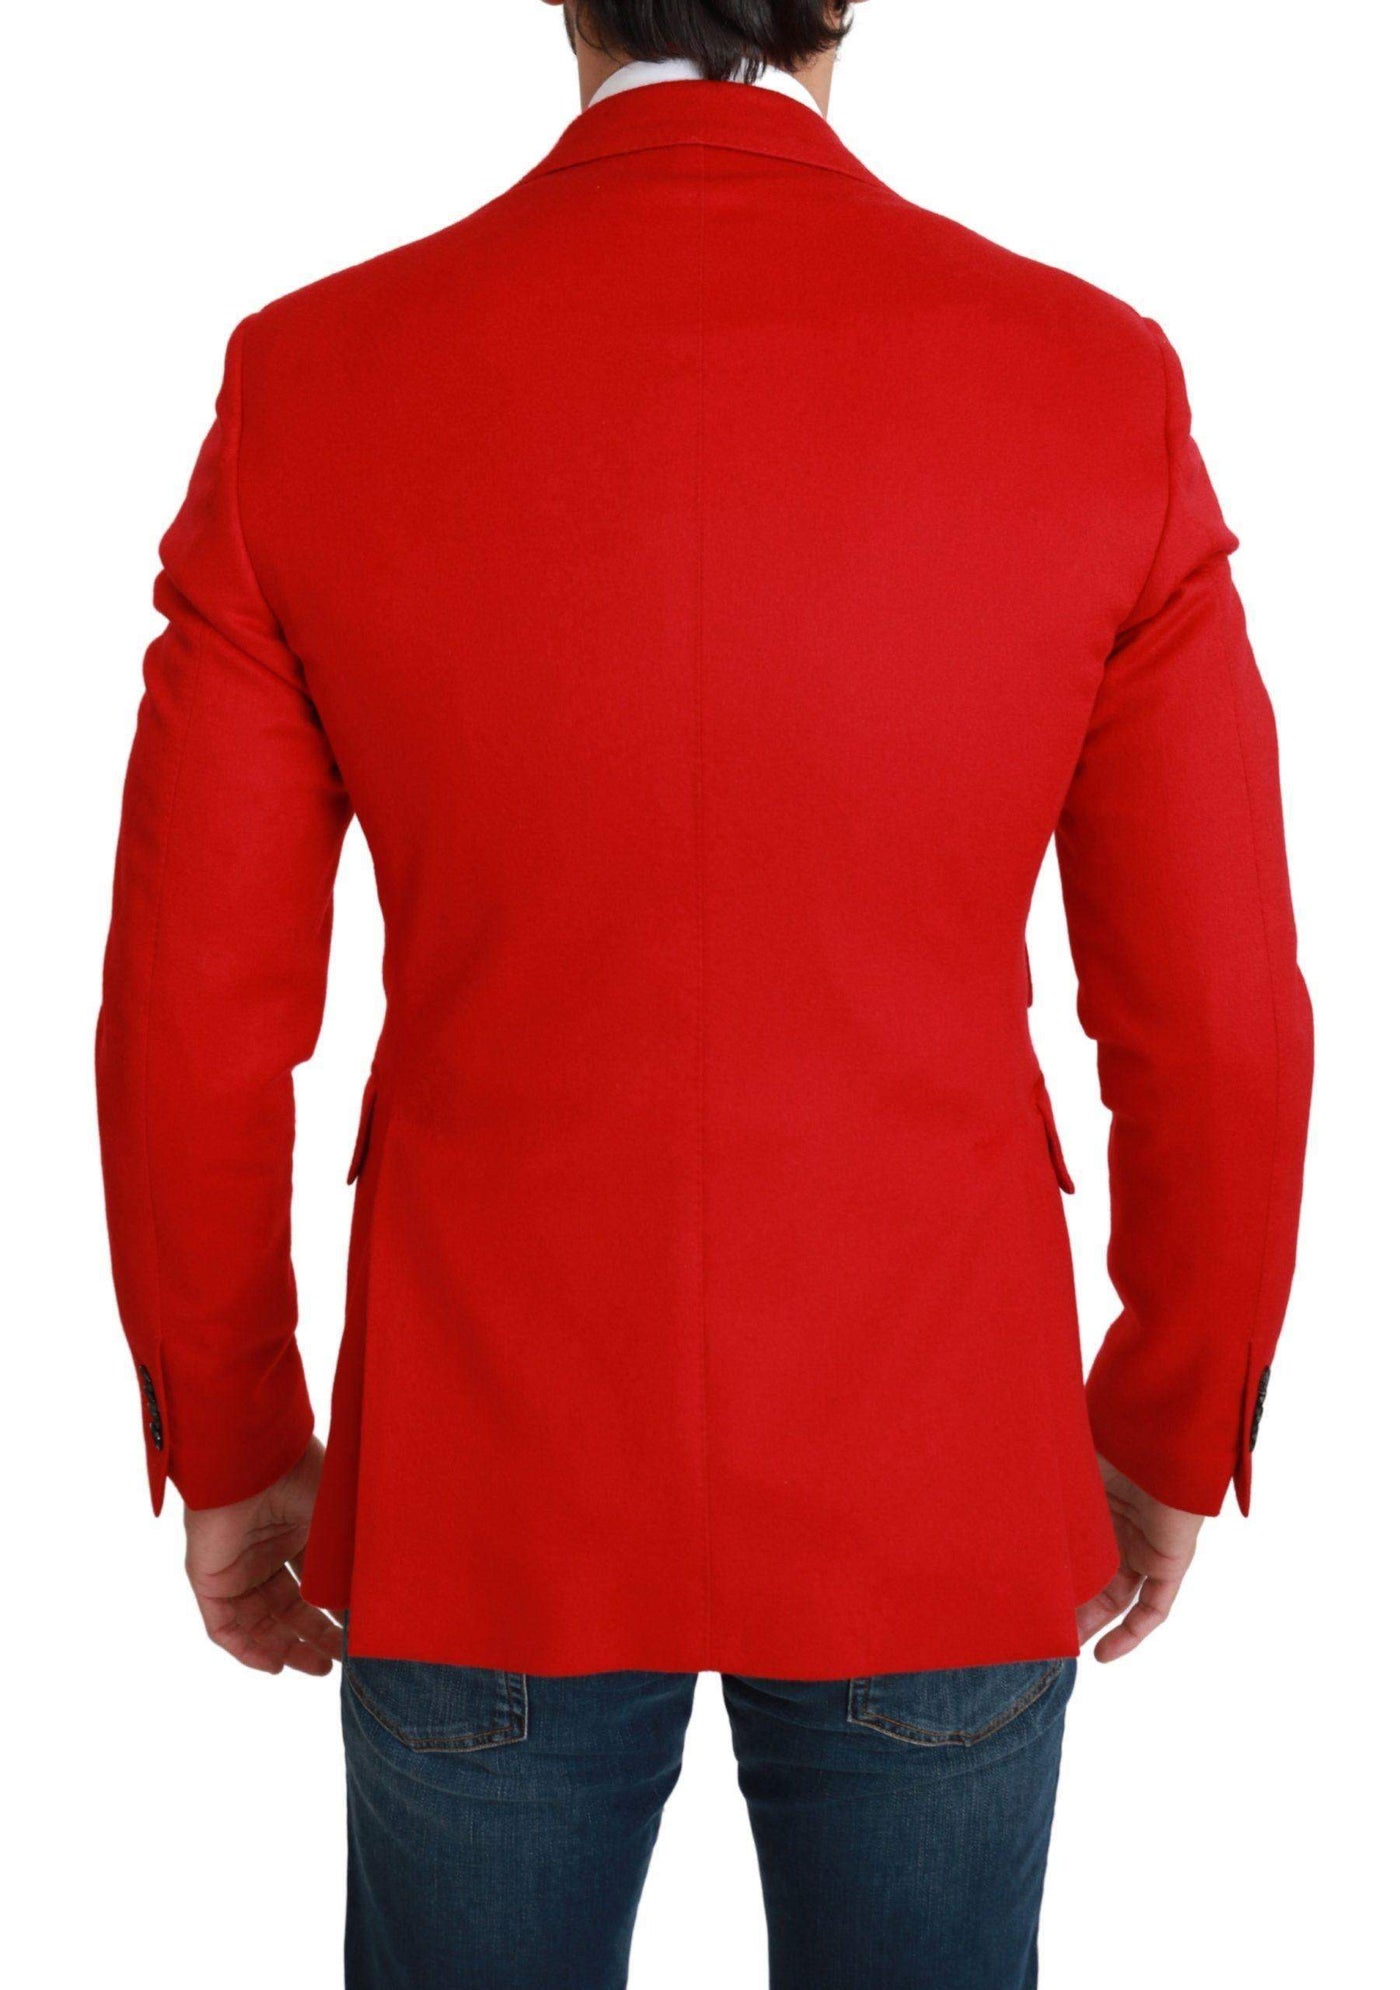 Dolce & Gabbana  Red Cashmere Slim Fit Coat Jacket Blazer #men, Blazers - Men - Clothing, Brand_Dolce & Gabbana, Catch, Dolce & Gabbana, feed-agegroup-adult, feed-color-red, feed-gender-male, feed-size-IT46 | S, Gender_Men, IT46 | S, Kogan, Men - New Arrivals, Red at SEYMAYKA